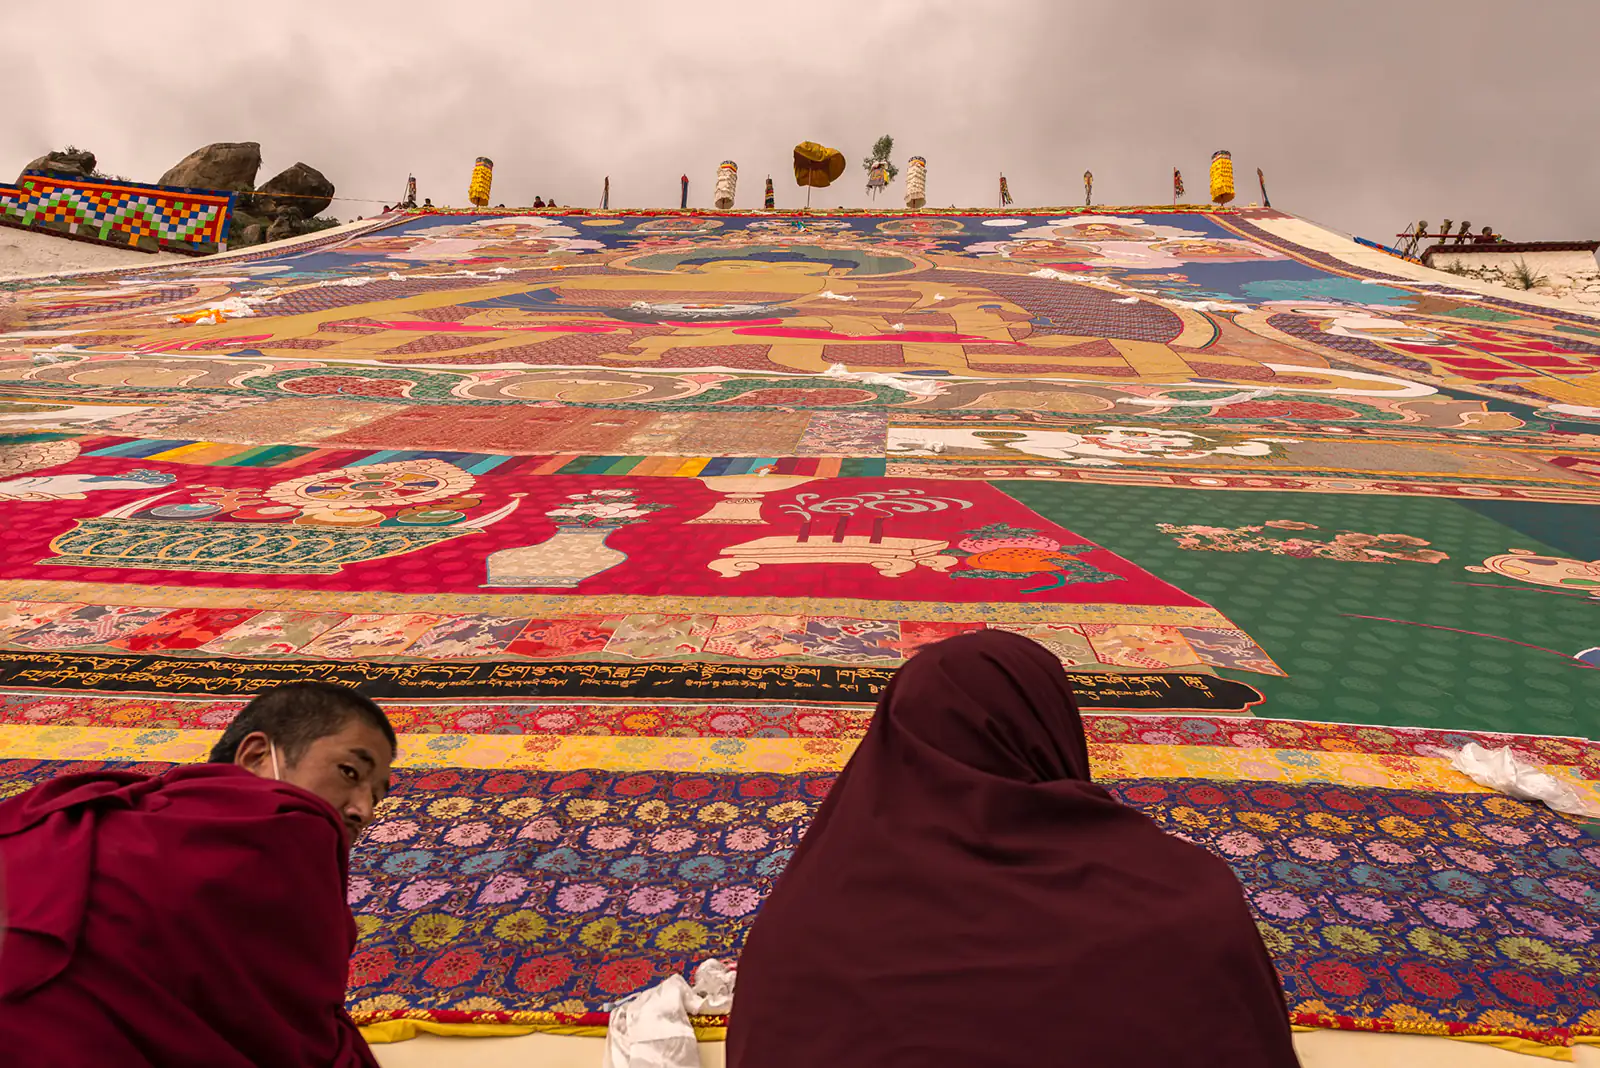 The prelude of the Shoton Festival is the Buddha exhibition in Drepung Monastery